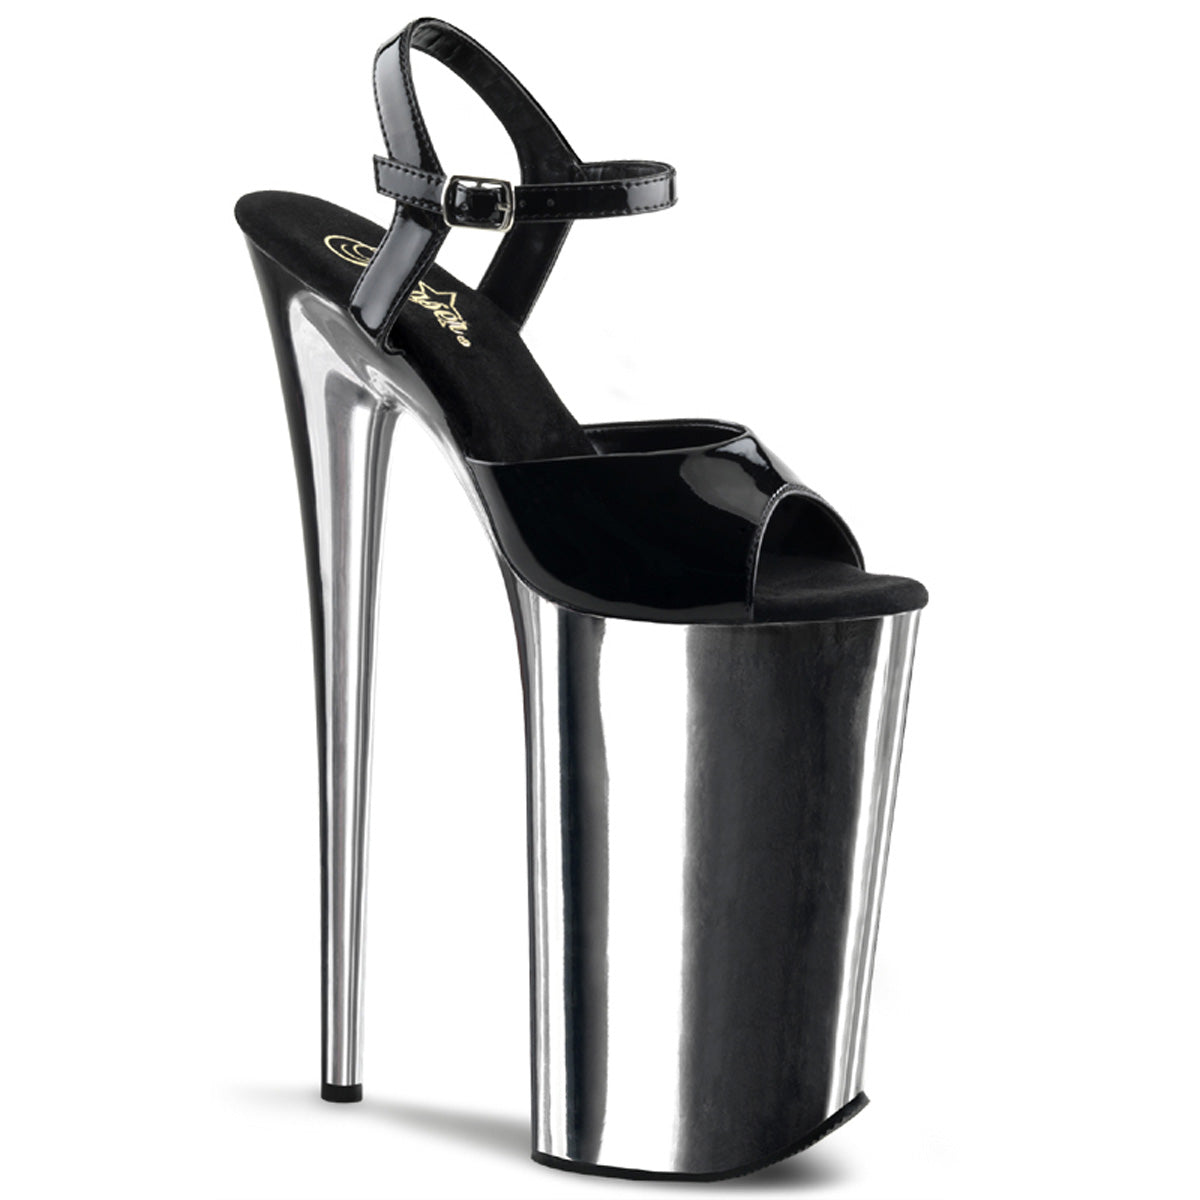 BEYOND-009 Sexy 10" Heel Black Silver Chrome Strippers Shoes